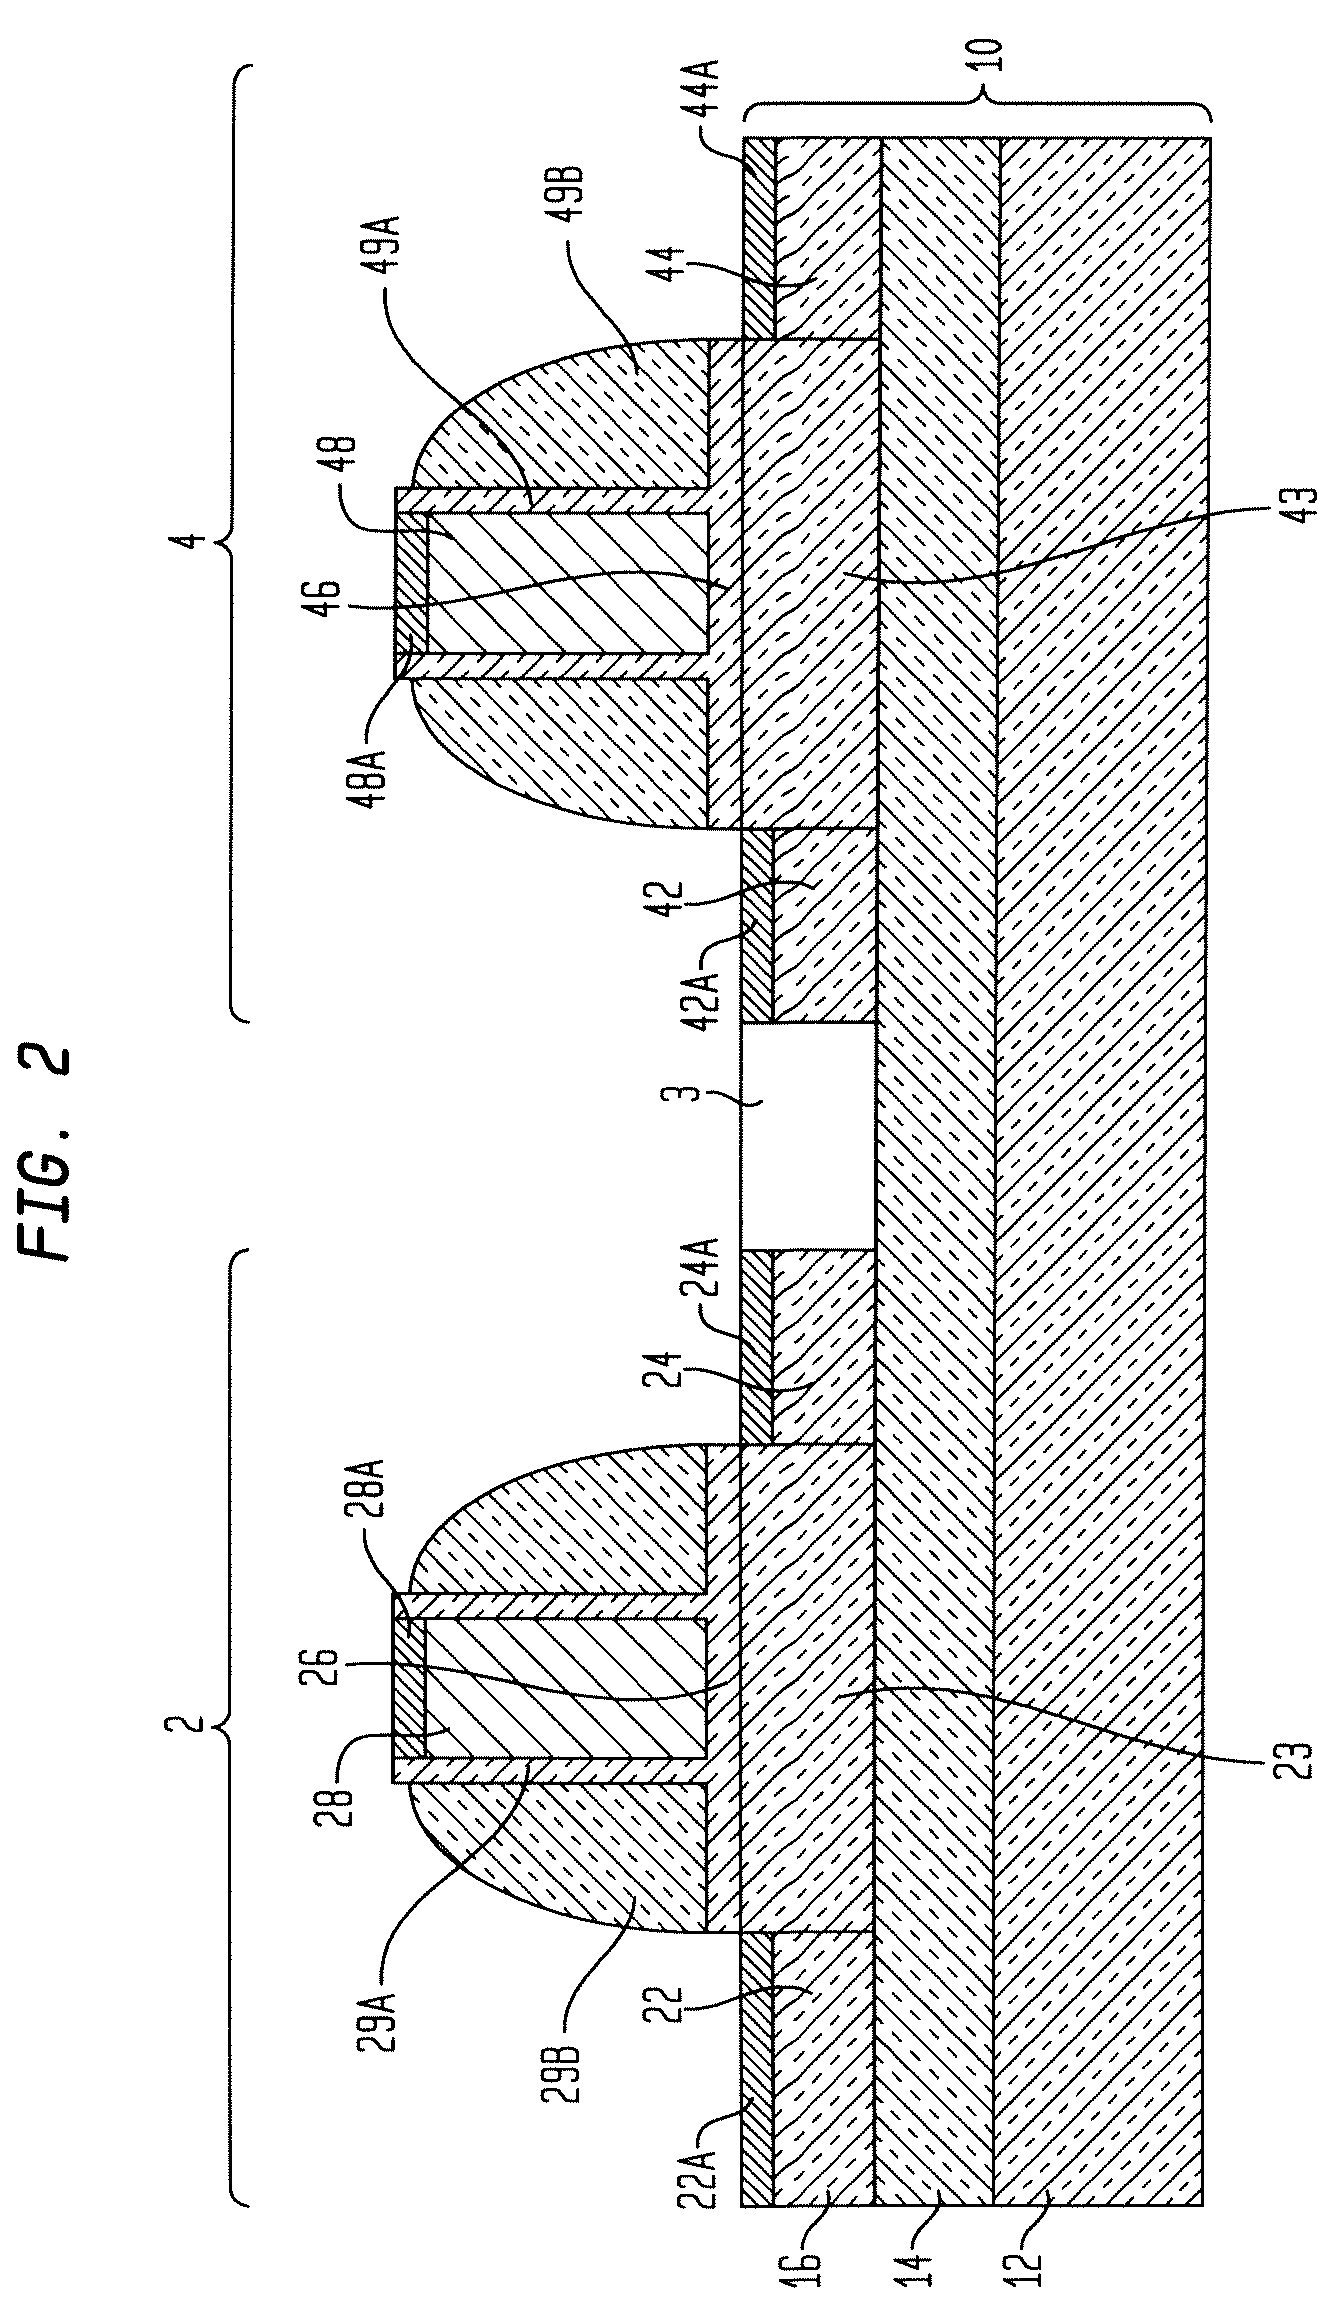 Methods for forming CMOS devices with intrinsically stressed metal silicide layers